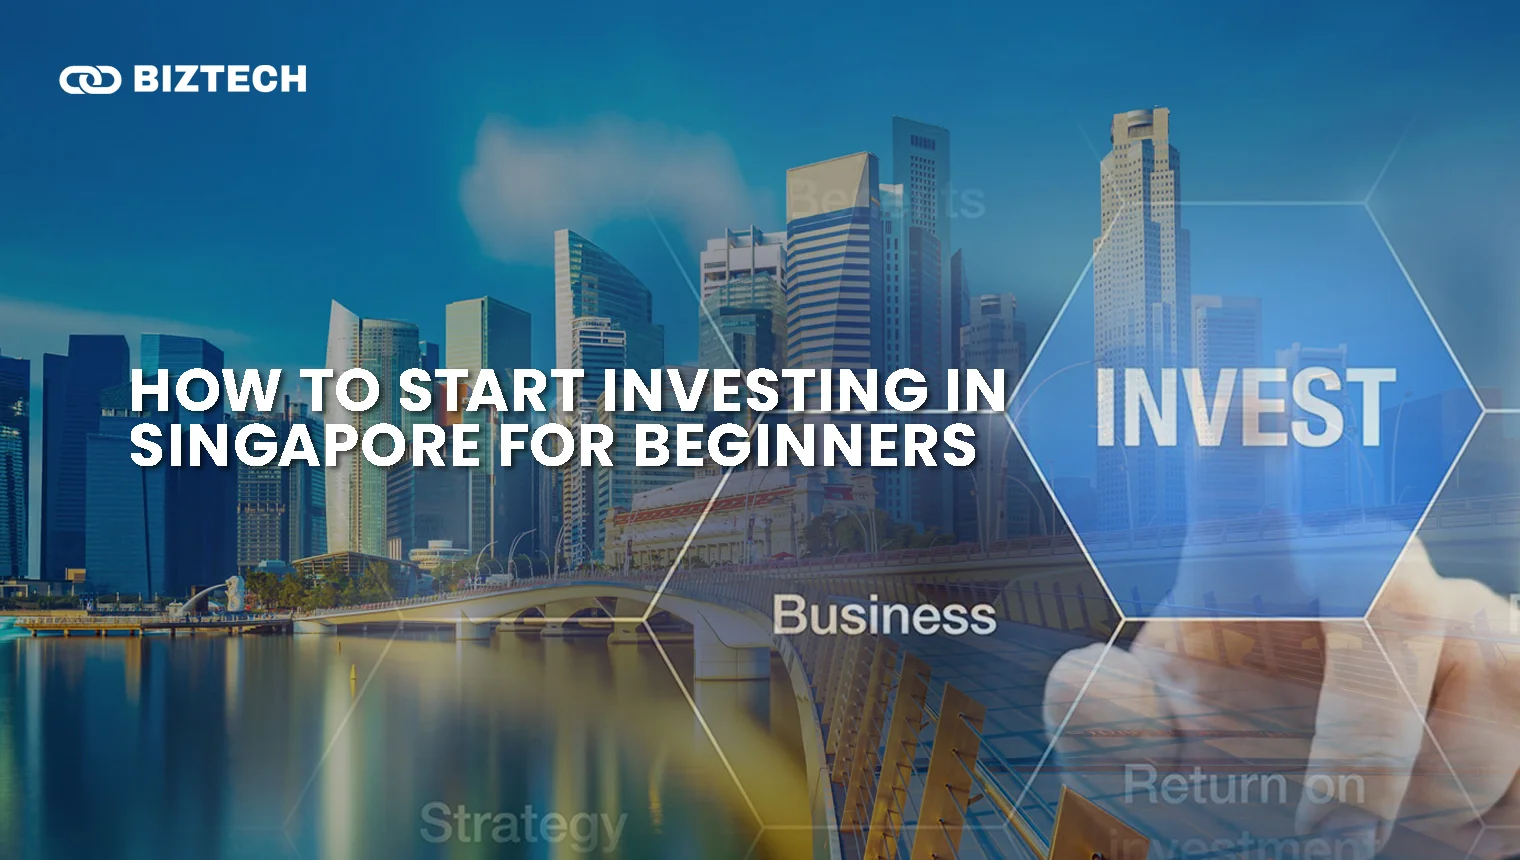 How to Start Investing in Singapore for Beginners